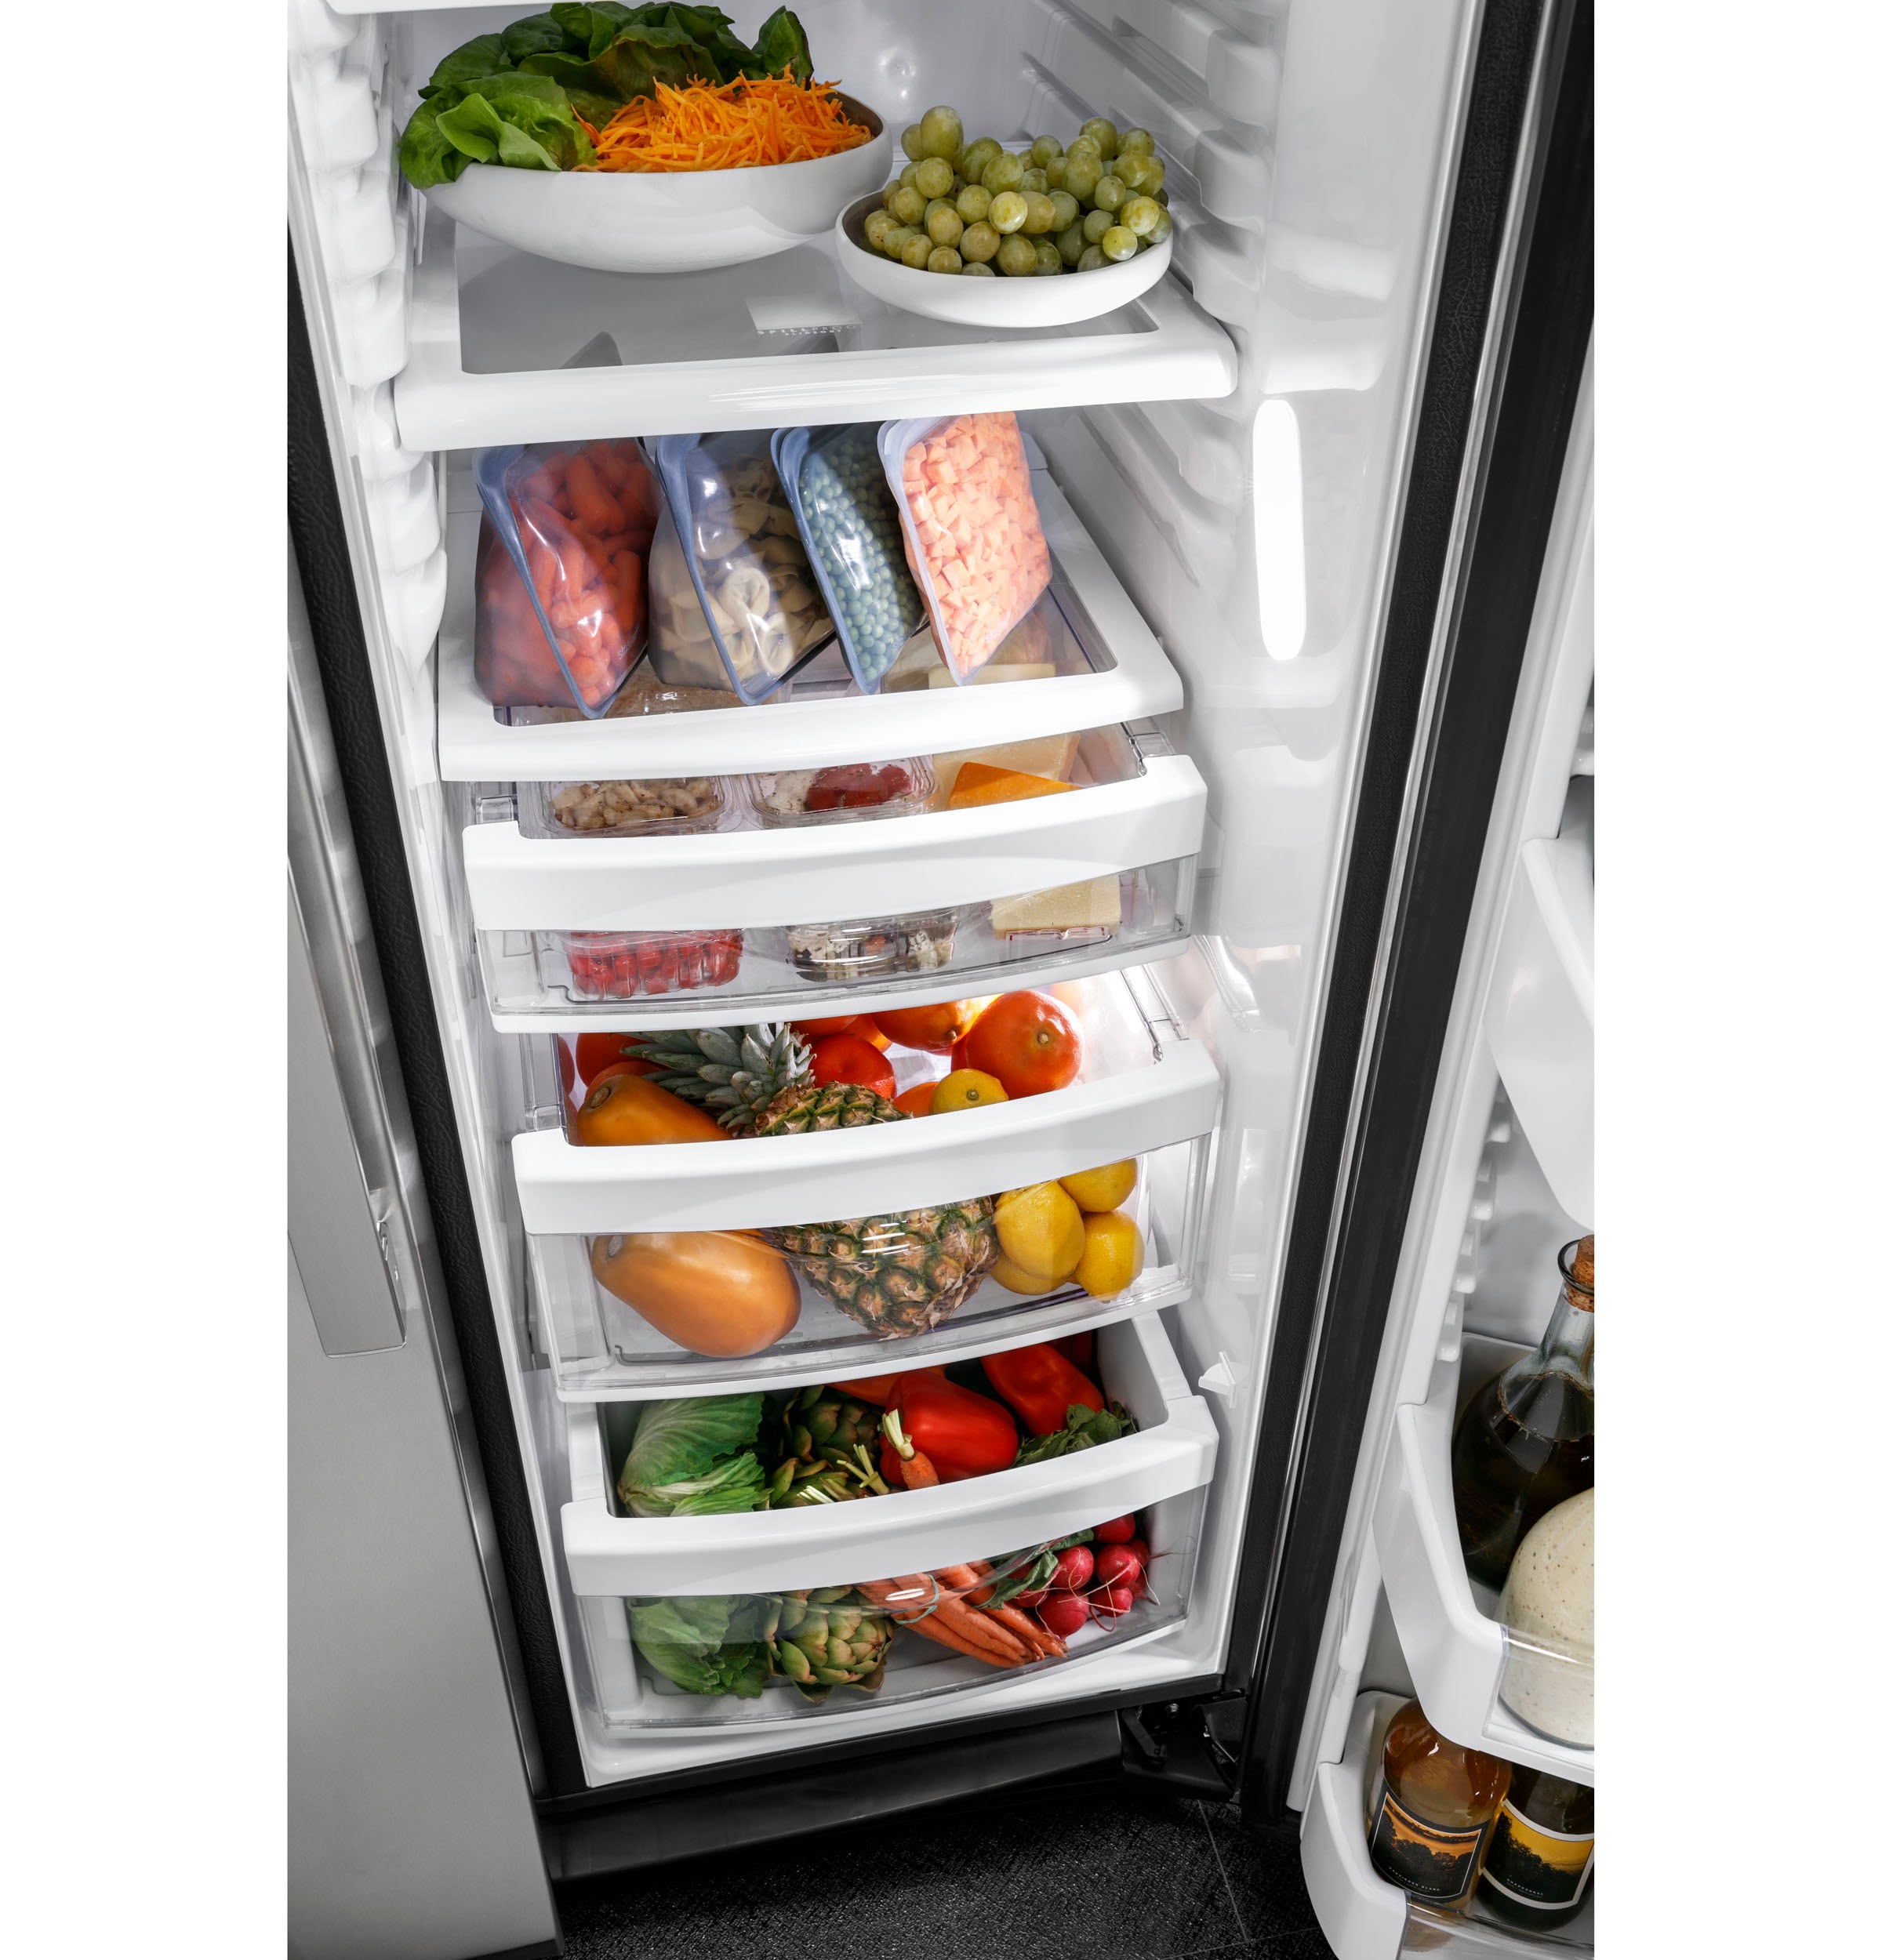 GE 21.9-cu ft Counter-Depth Side-by-Side Refrigerator with Ice Maker  (Slate) at